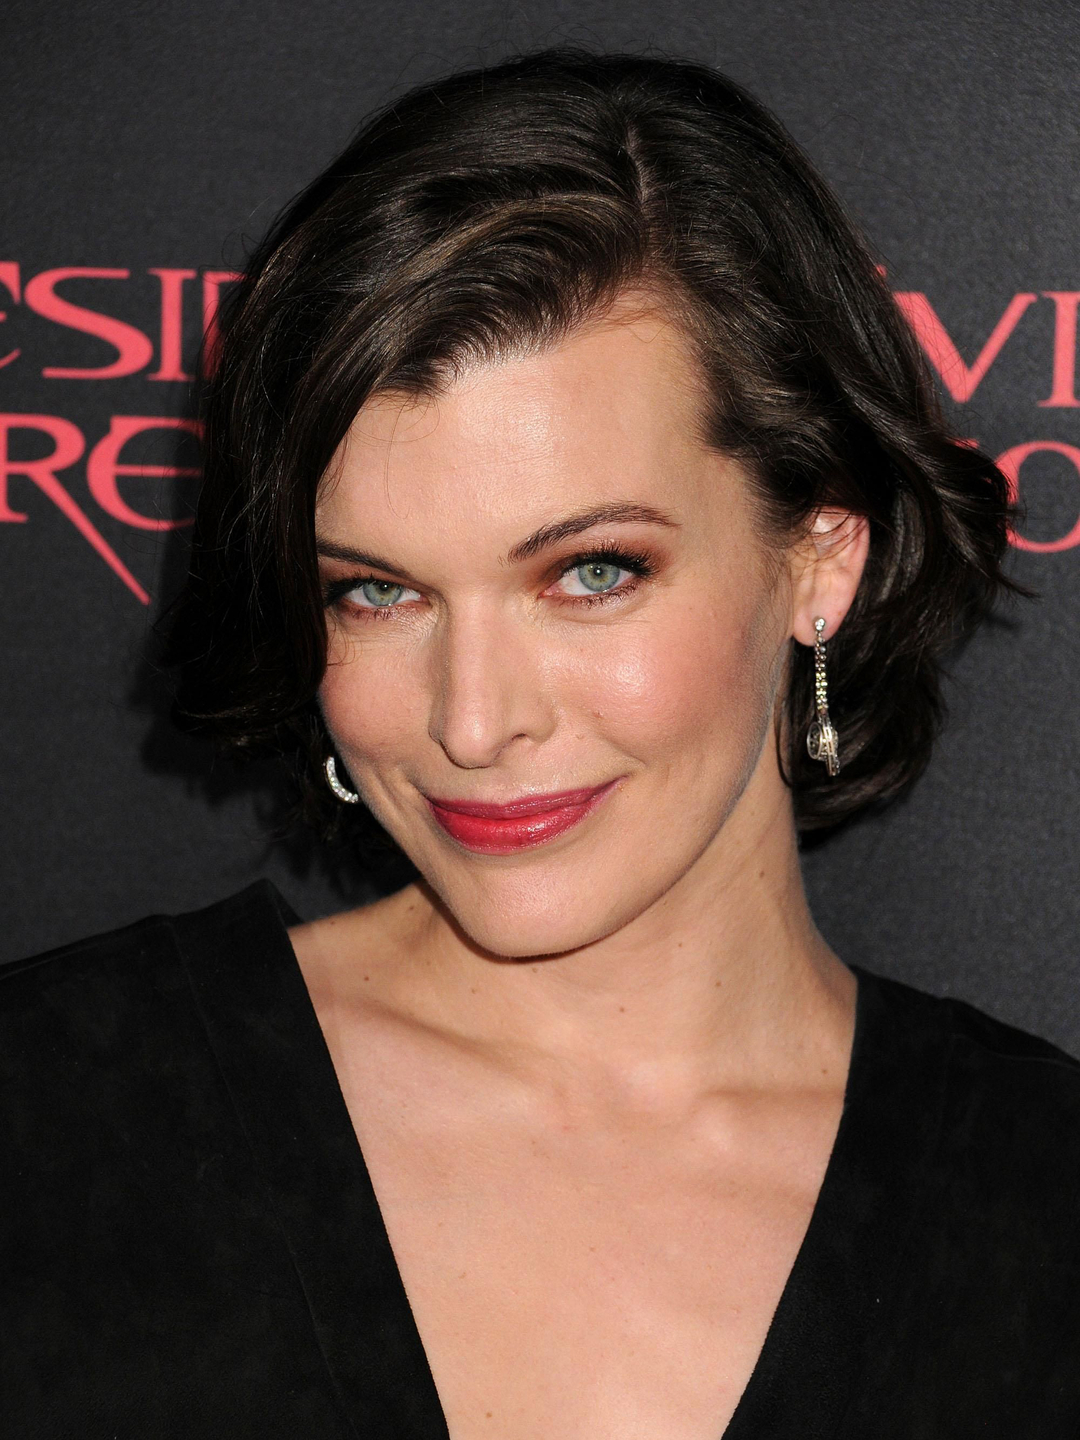 Milla Jovovich height and weight